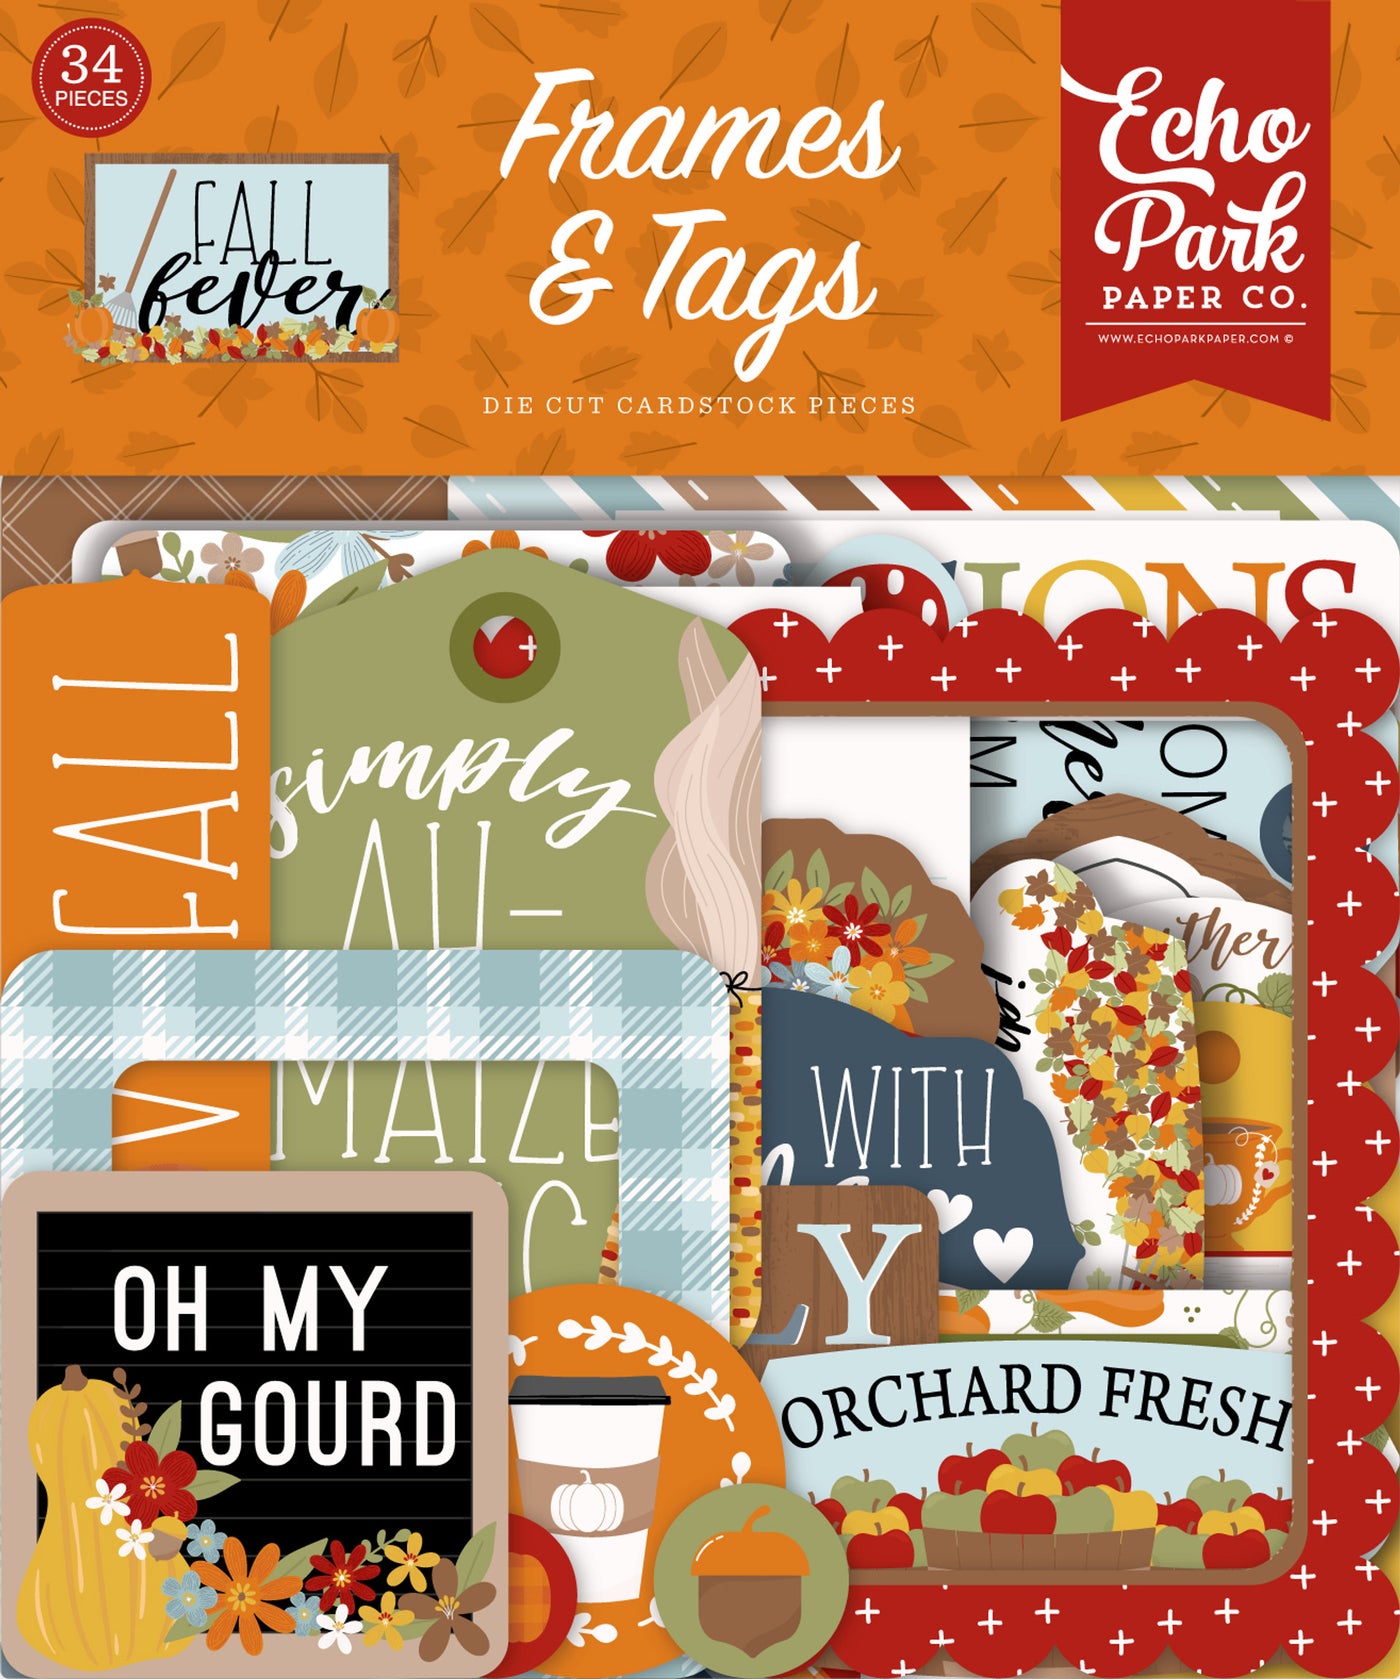 Fall Fever Frames & Tags Die Cut Cardstock Pack includes 34 different die-cut shapes ready to embellish any project. 